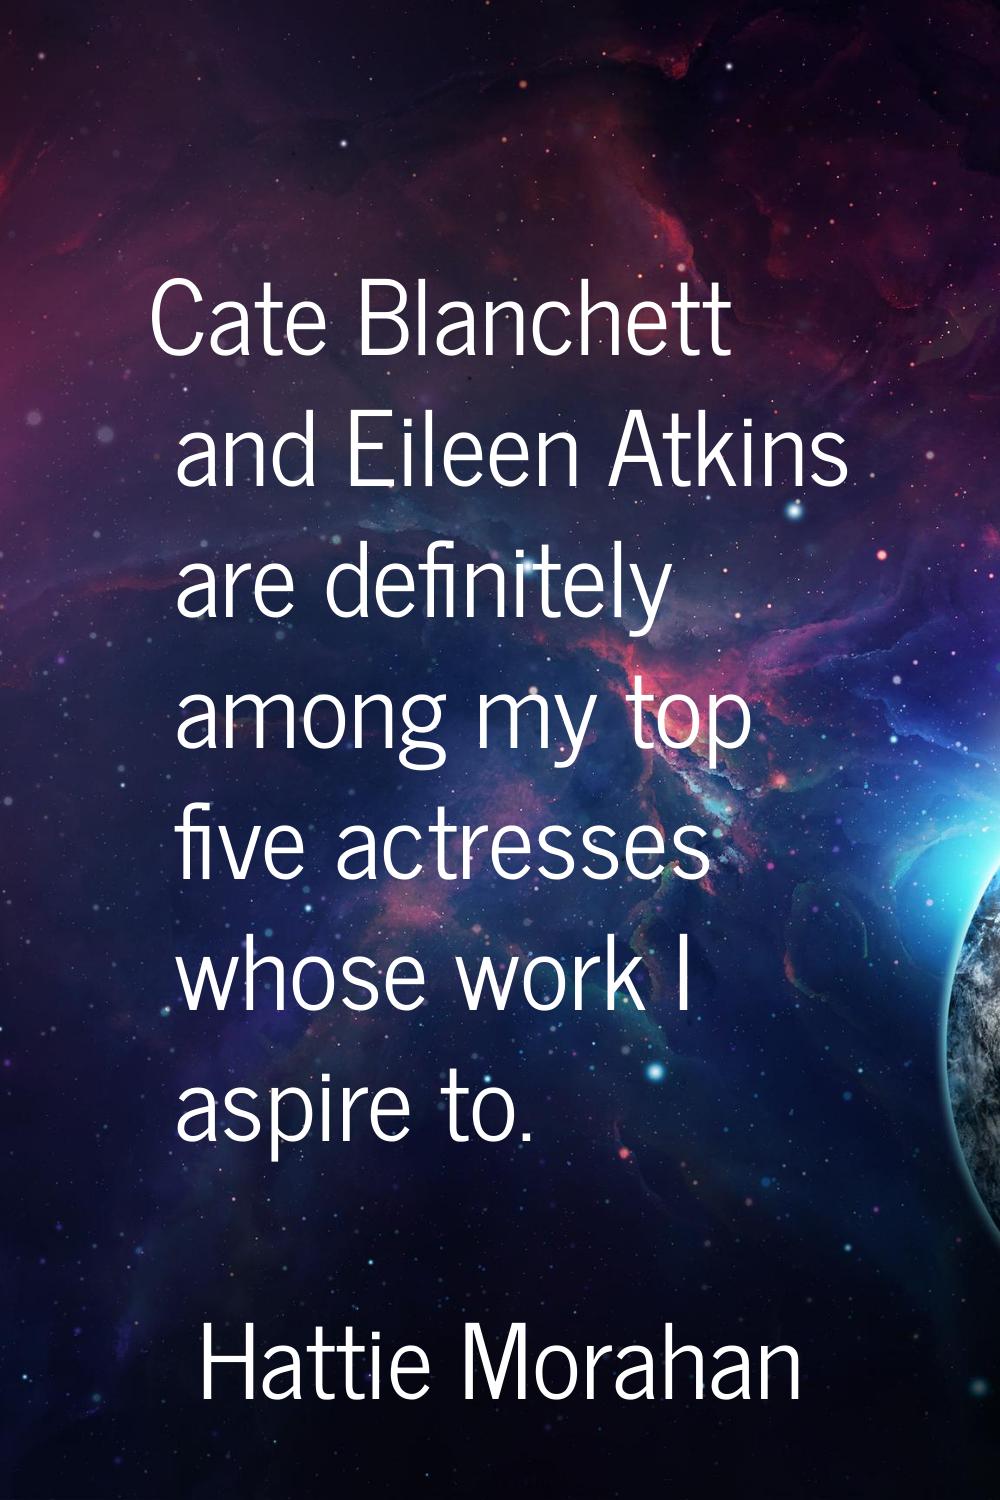 Cate Blanchett and Eileen Atkins are definitely among my top five actresses whose work I aspire to.